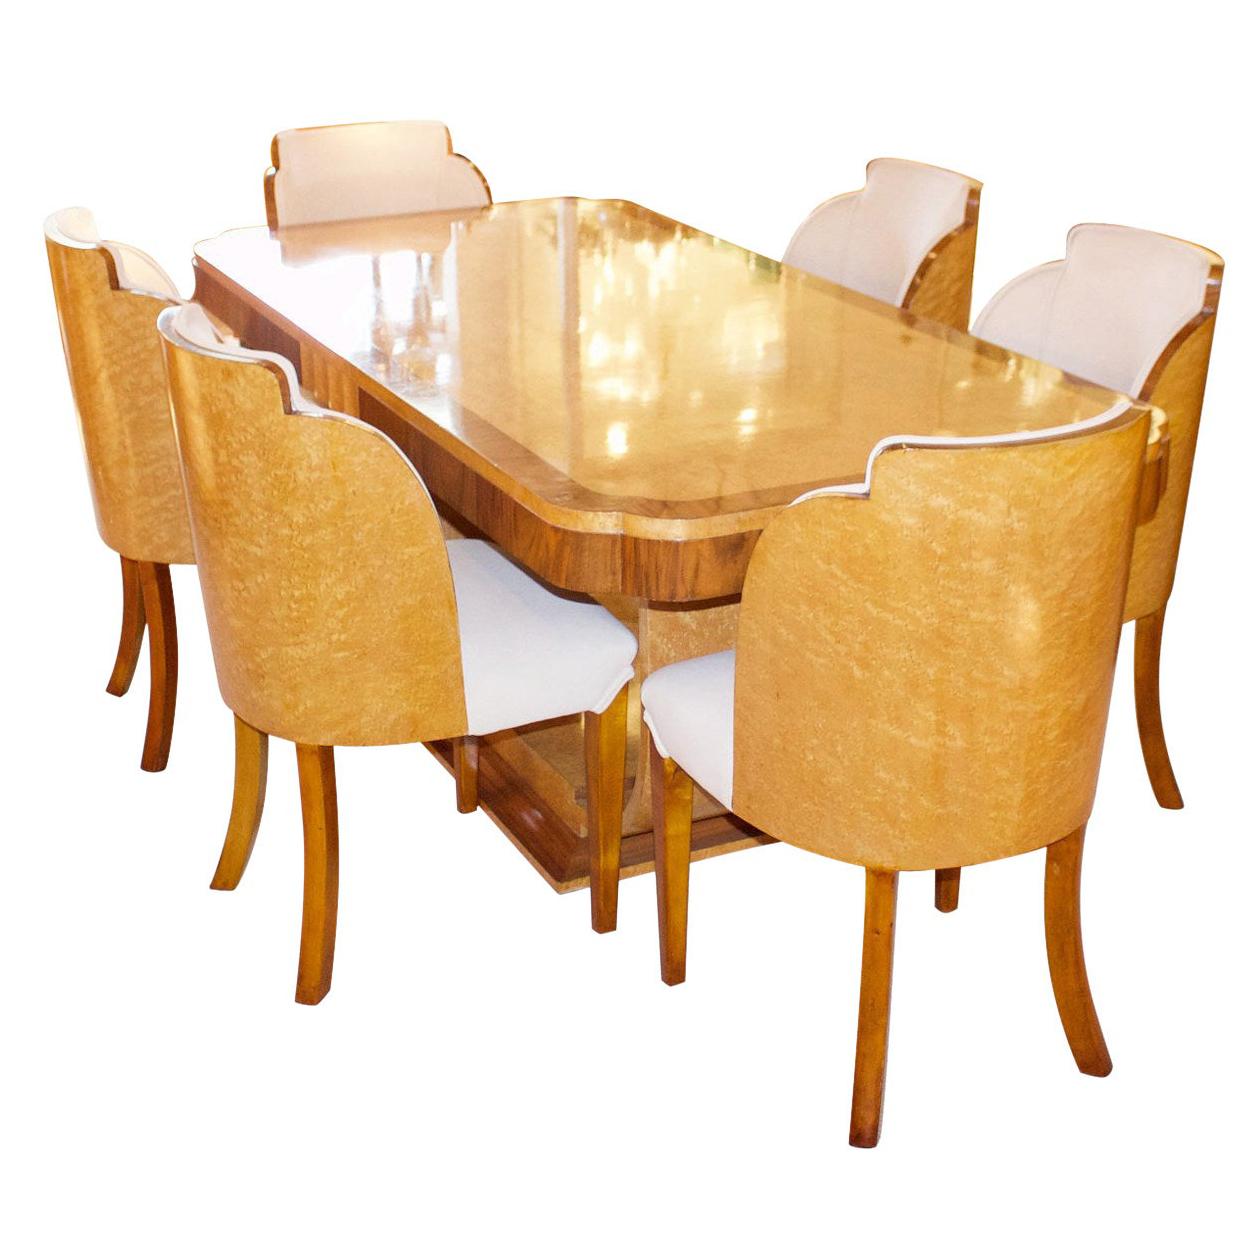 Art Deco 6-Seat Dining Suite by Harry & Lou Epstein, English, circa 1930